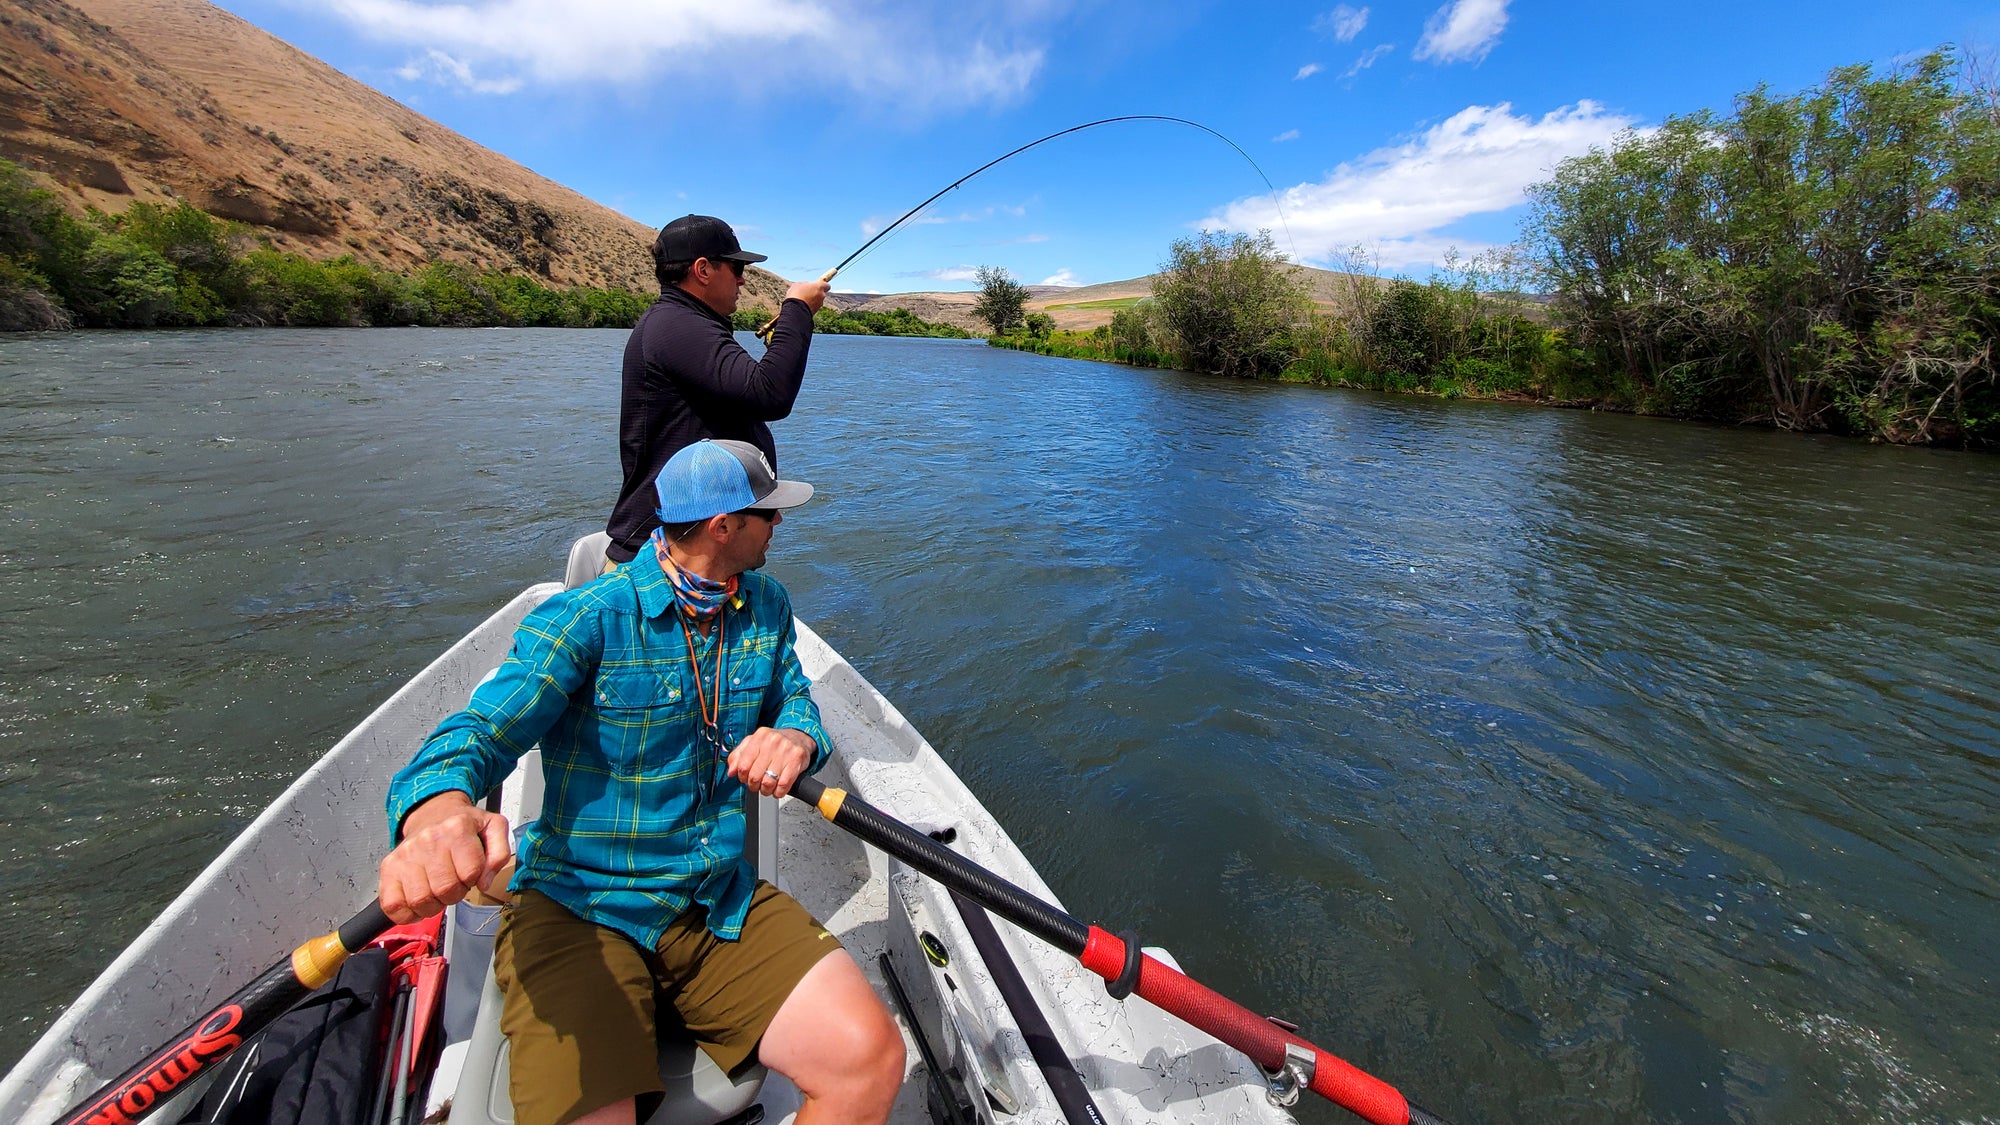 So You Want to Learn to Fly Fish - Endless River Adventures